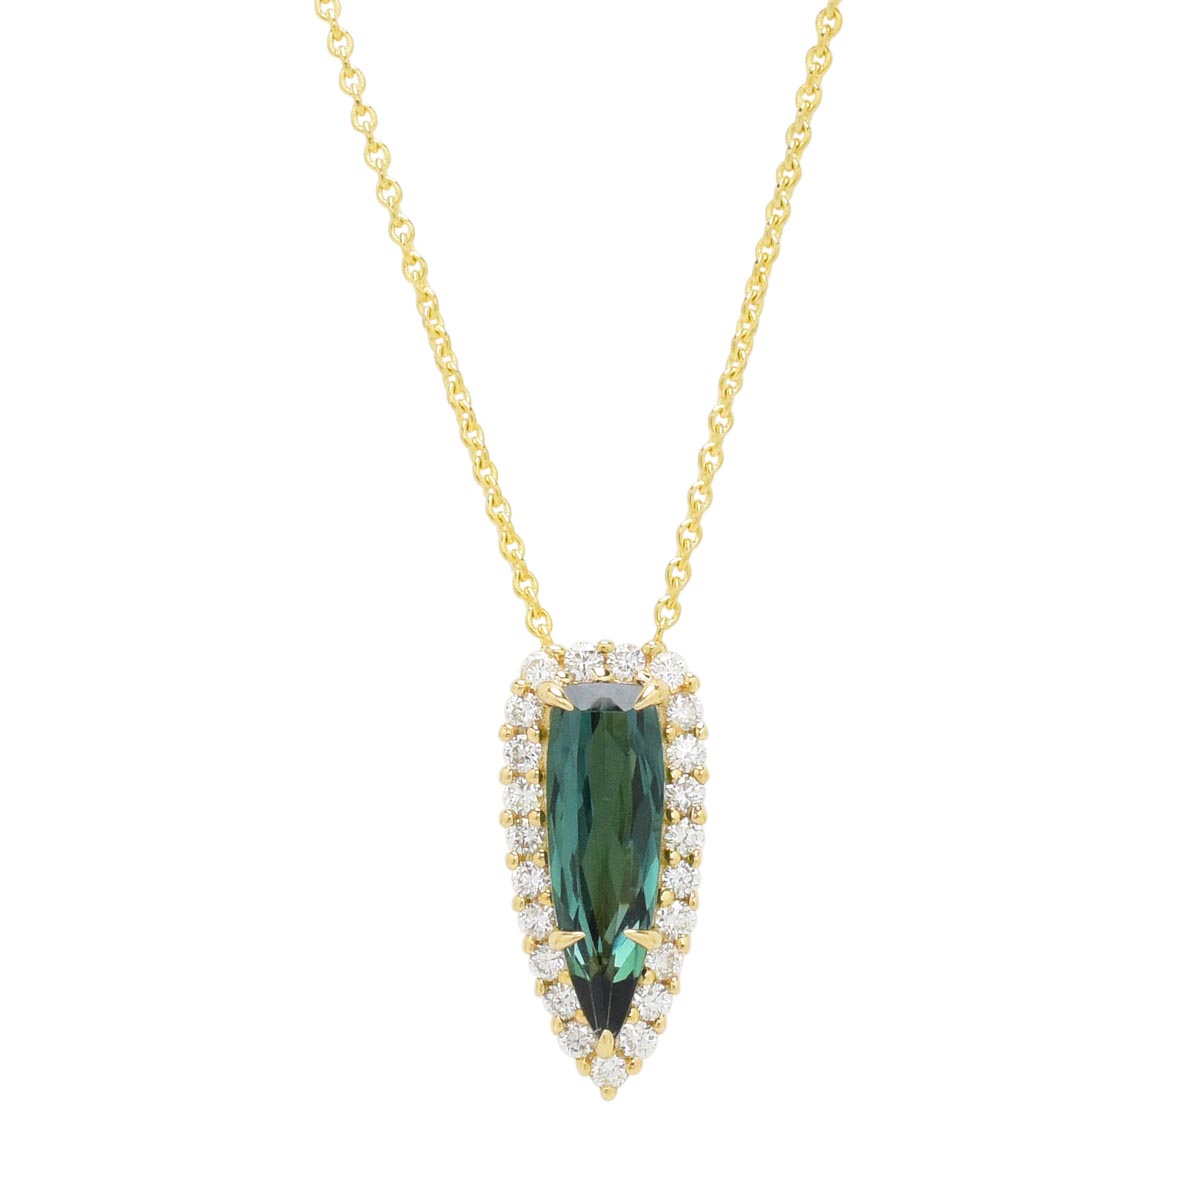 Maine Green Tourmaline Necklace in 14kt Yellow Gold with Diamonds (1/5ct tw)